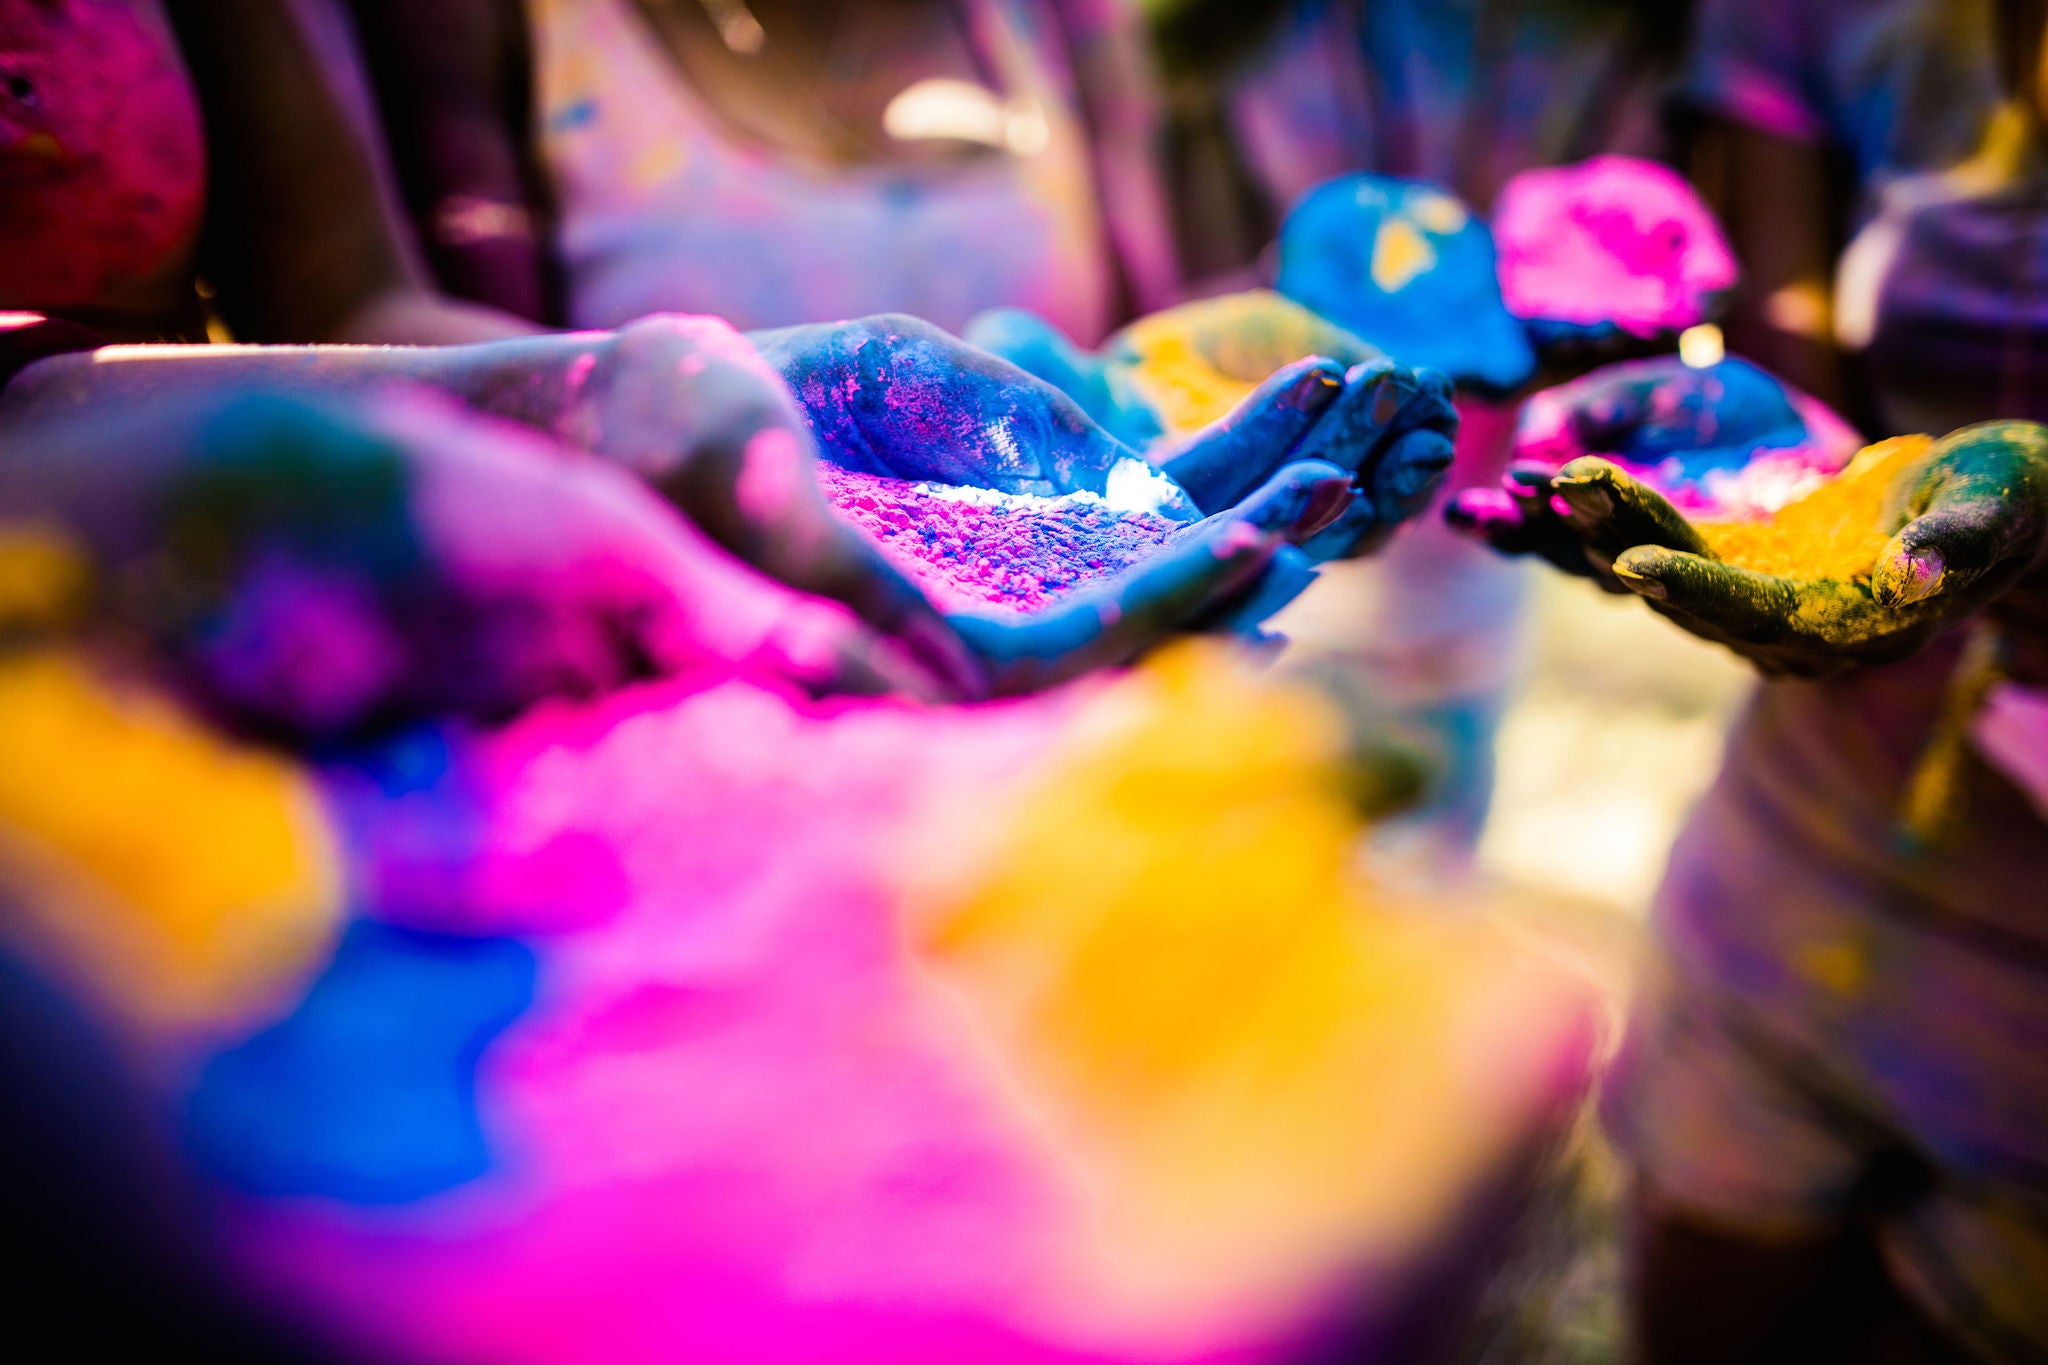 Group shot of hands covered in colors, holding colorful powder during a Holi festival in a park